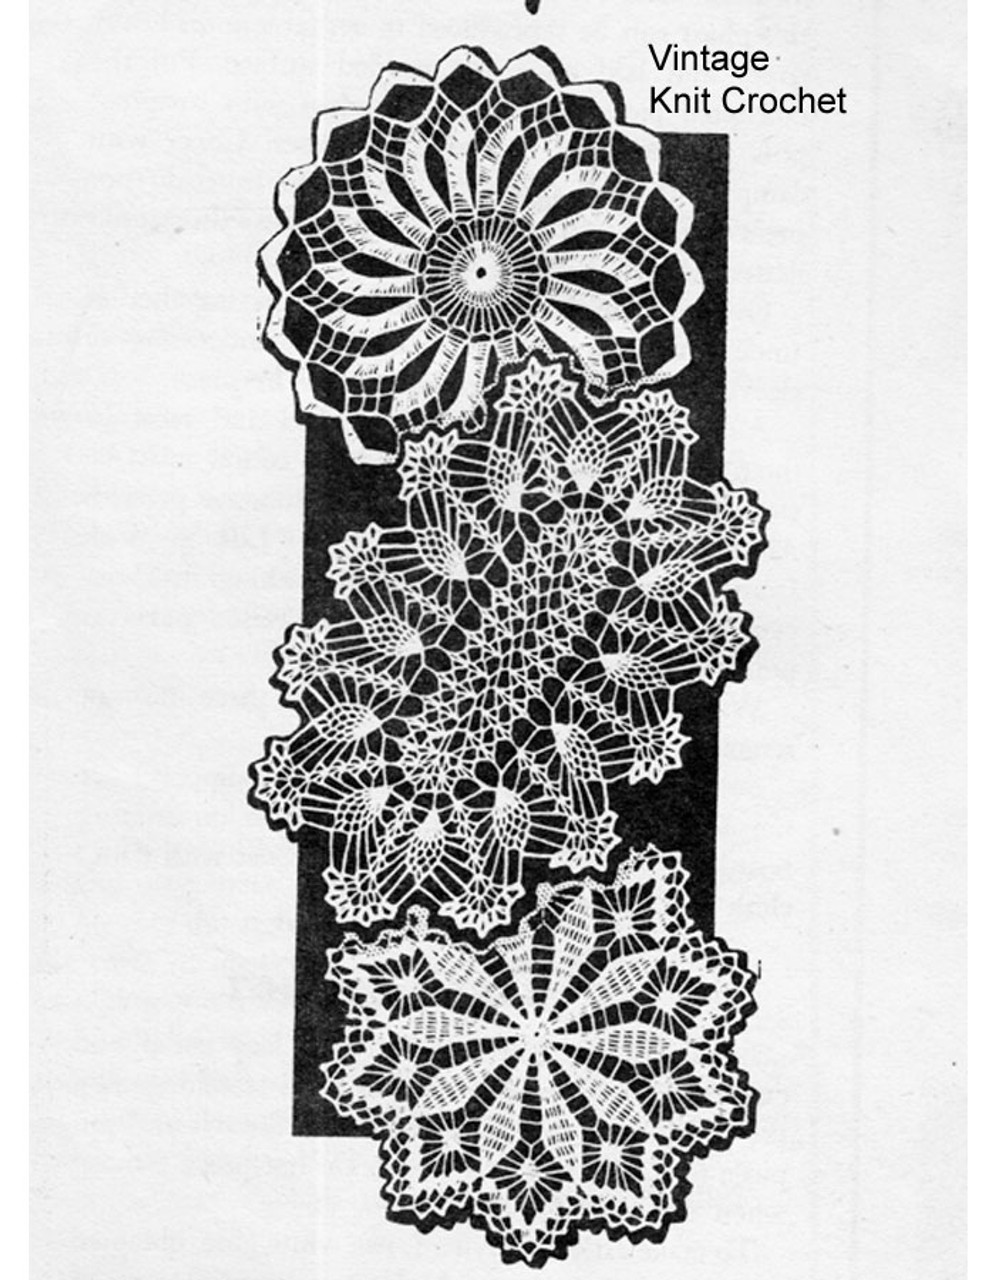 Three crocheted doilies, American Weekly Pattern No 3141